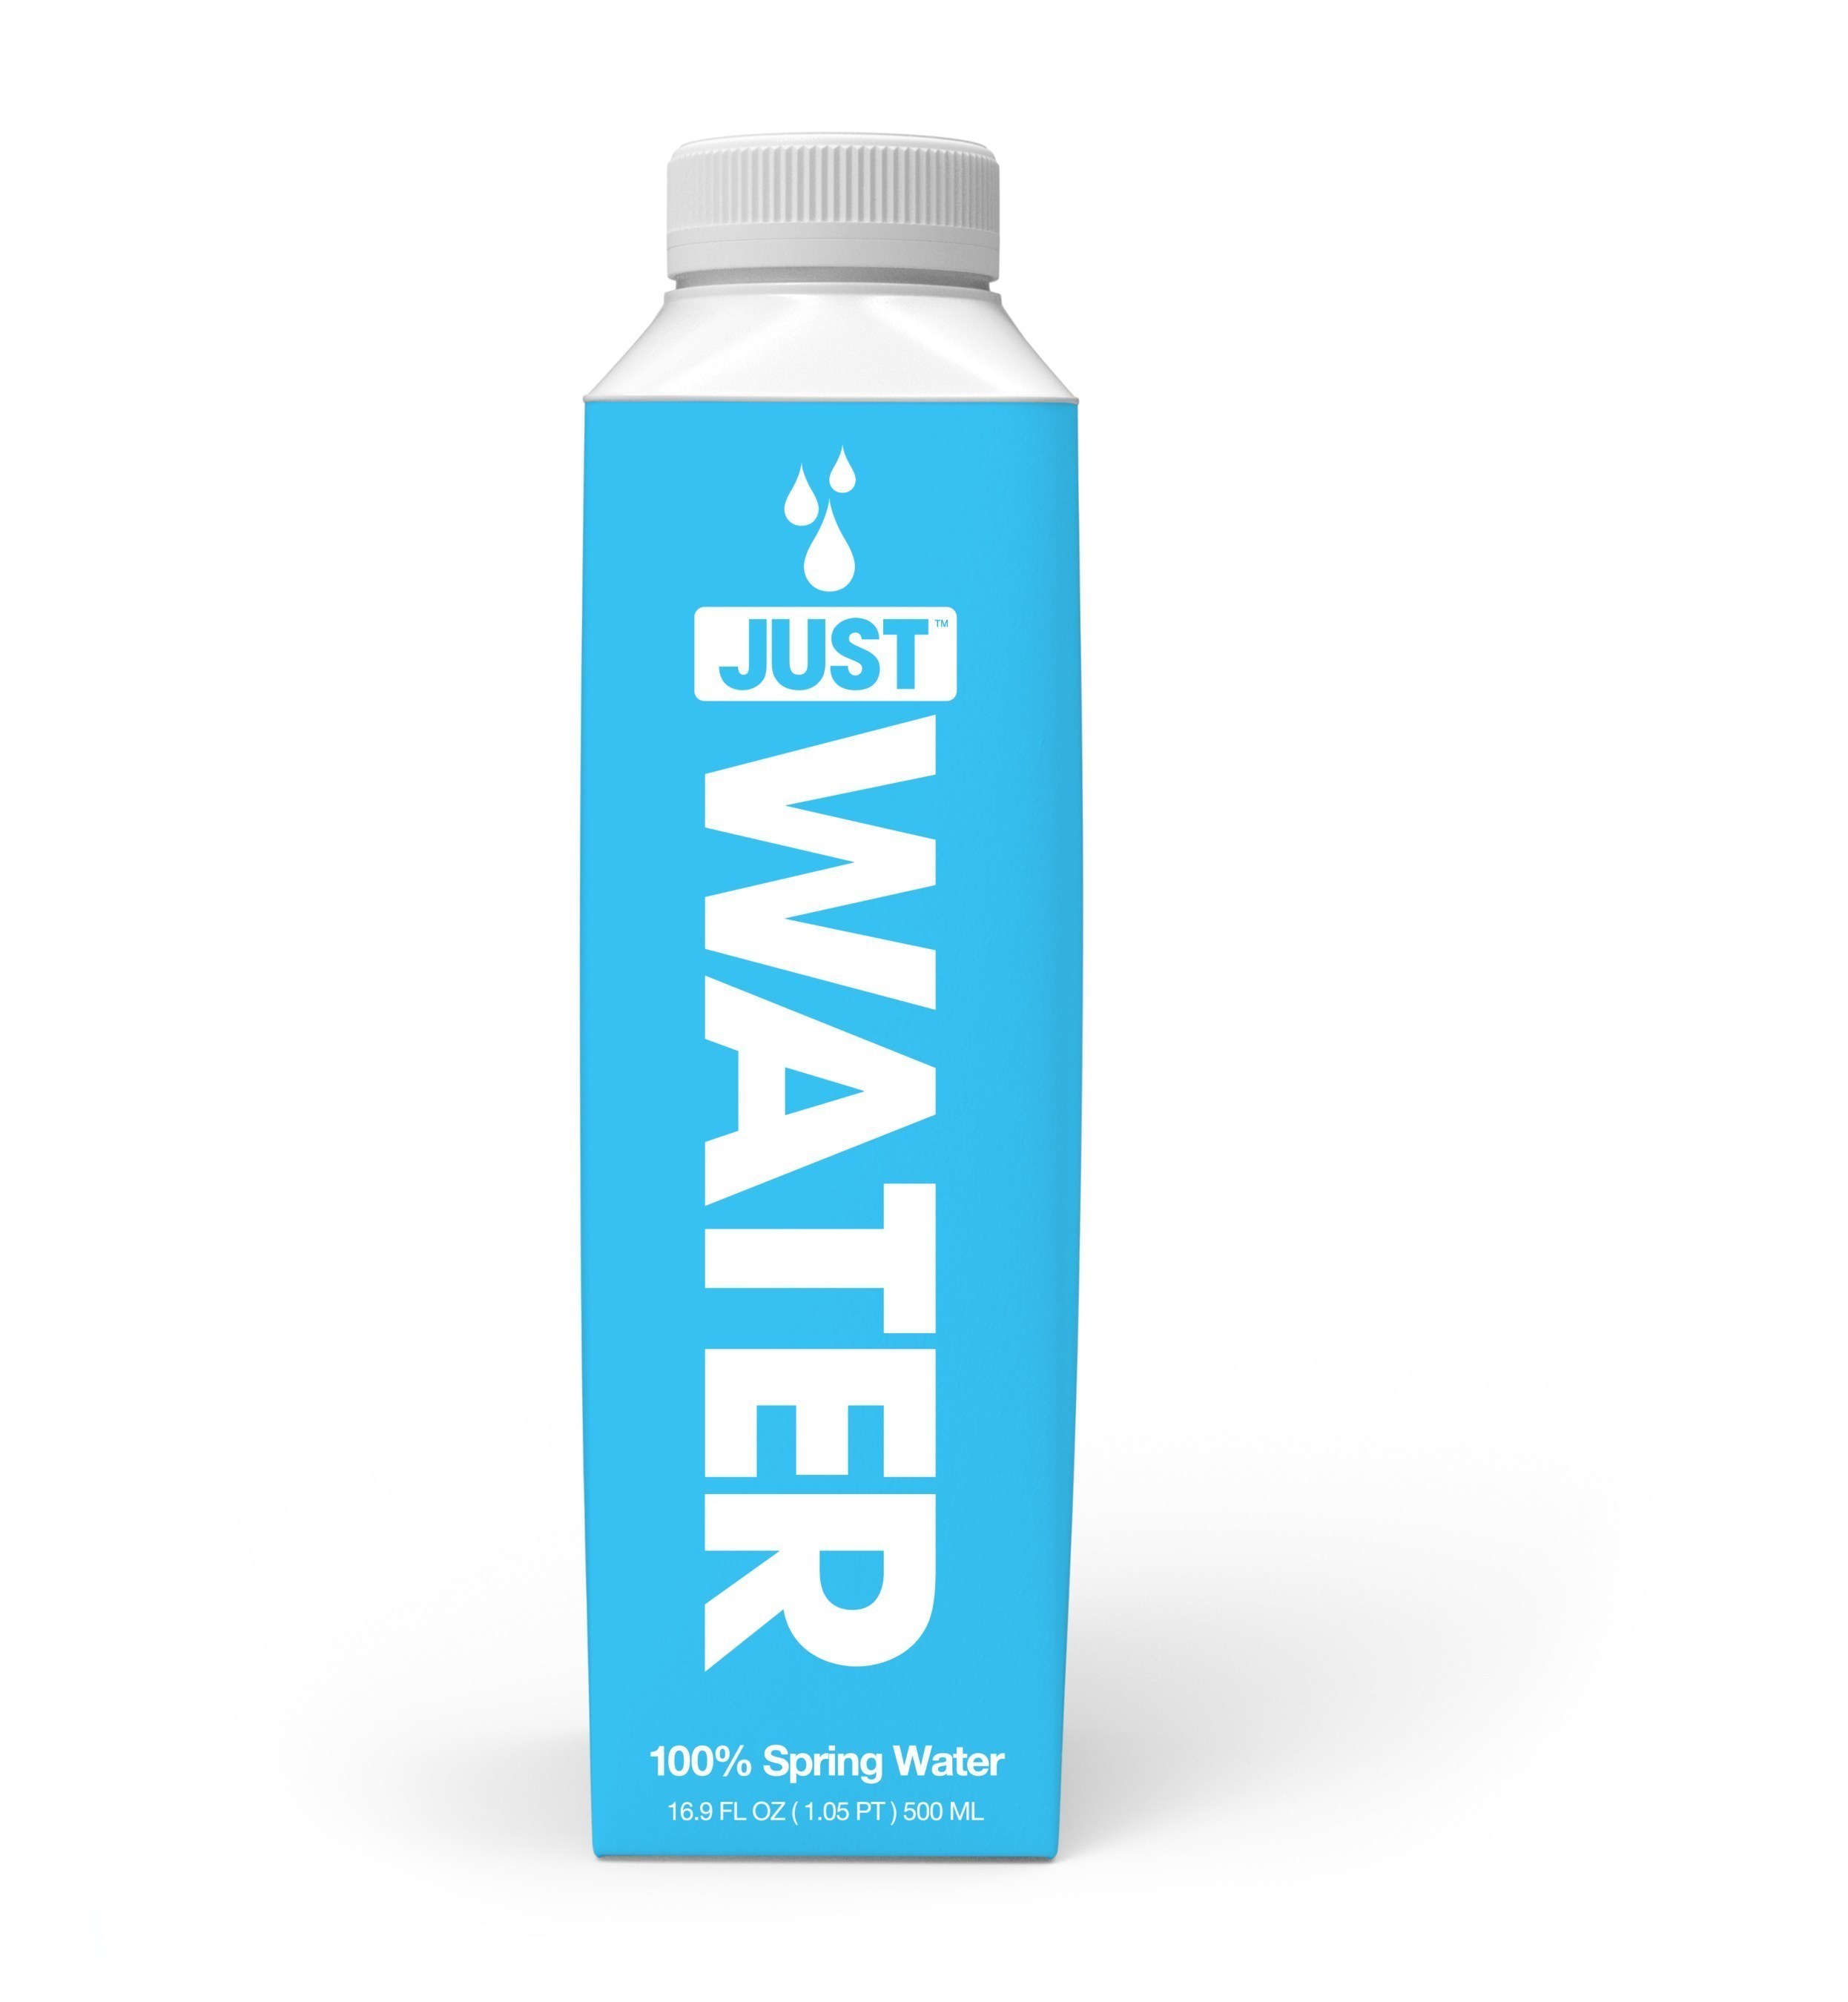 The JUST Water Bottle Gets Better on Earth Day with New Plant-Based Packaging